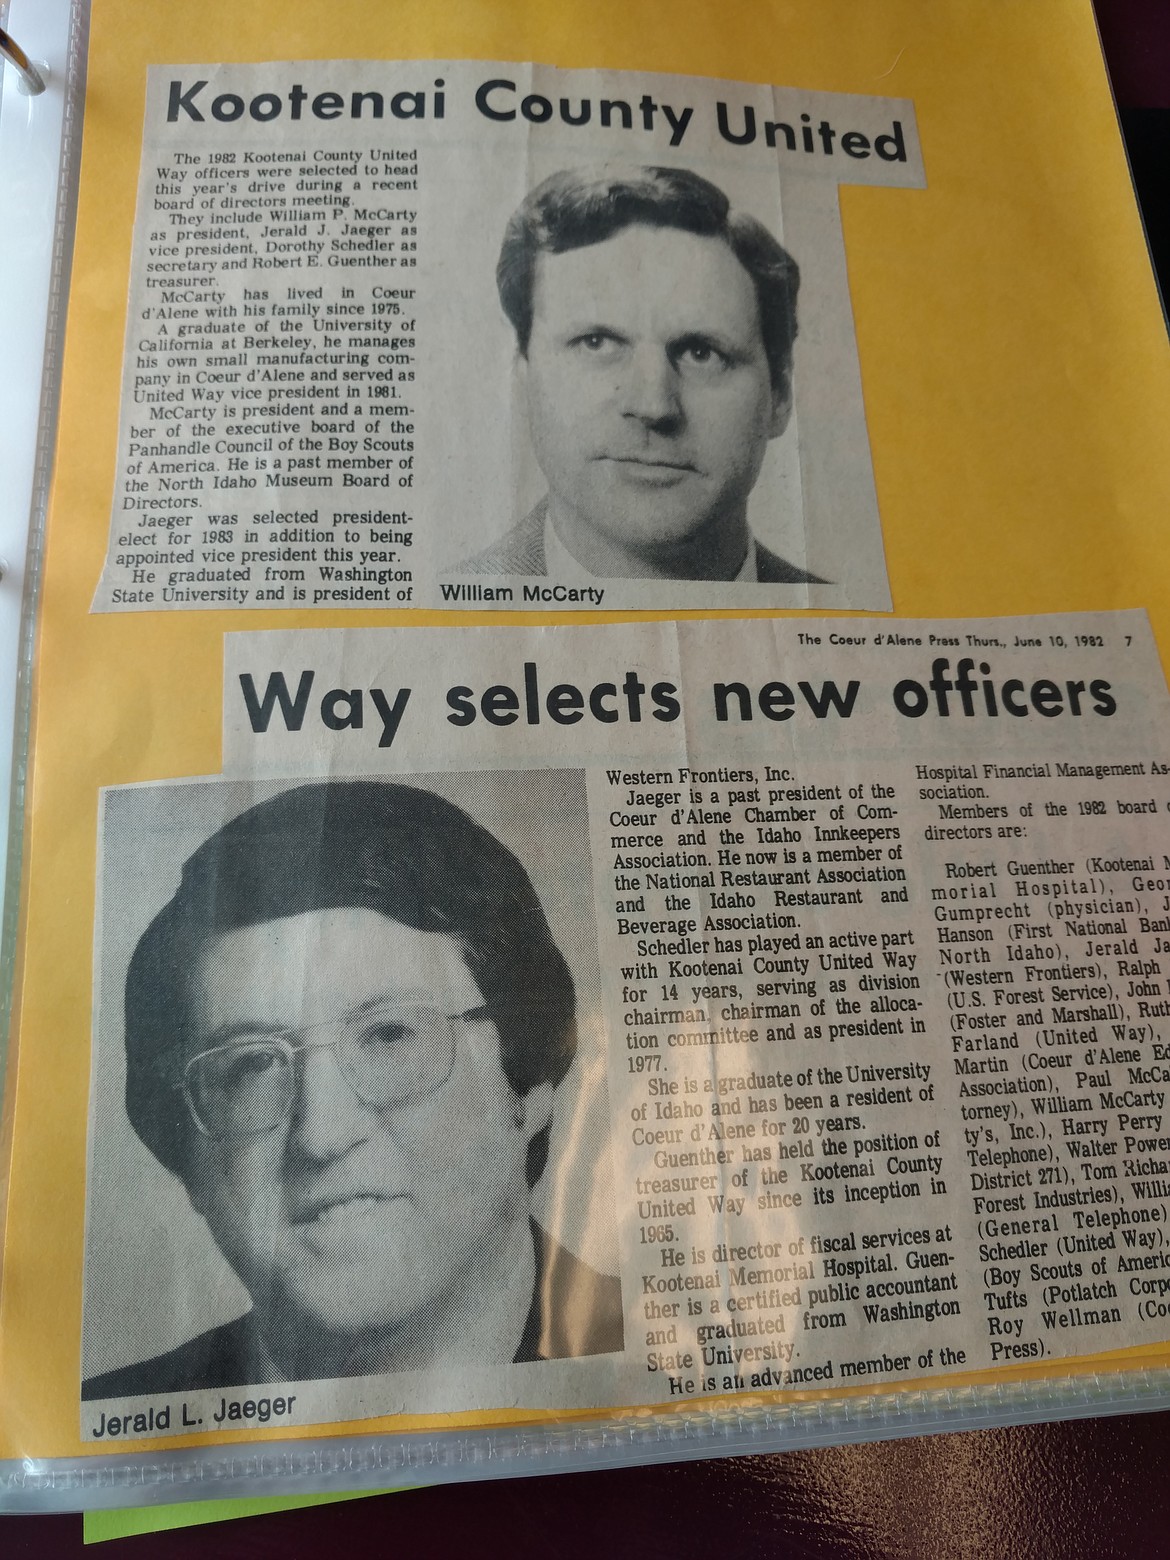 Hagadone Hospitality president and co-founder Jerry Jaeger, bottom photo, is seen here in this Press clipping announcing that he was selected as president-elect of the 1982 Kootenai County United Way (now United Way of North Idaho) fundraising drive. UWNI has attracted several prominent people to its leadership through the years, including Jaeger, Mayor Steve Widmyer and the Knudtsen family.